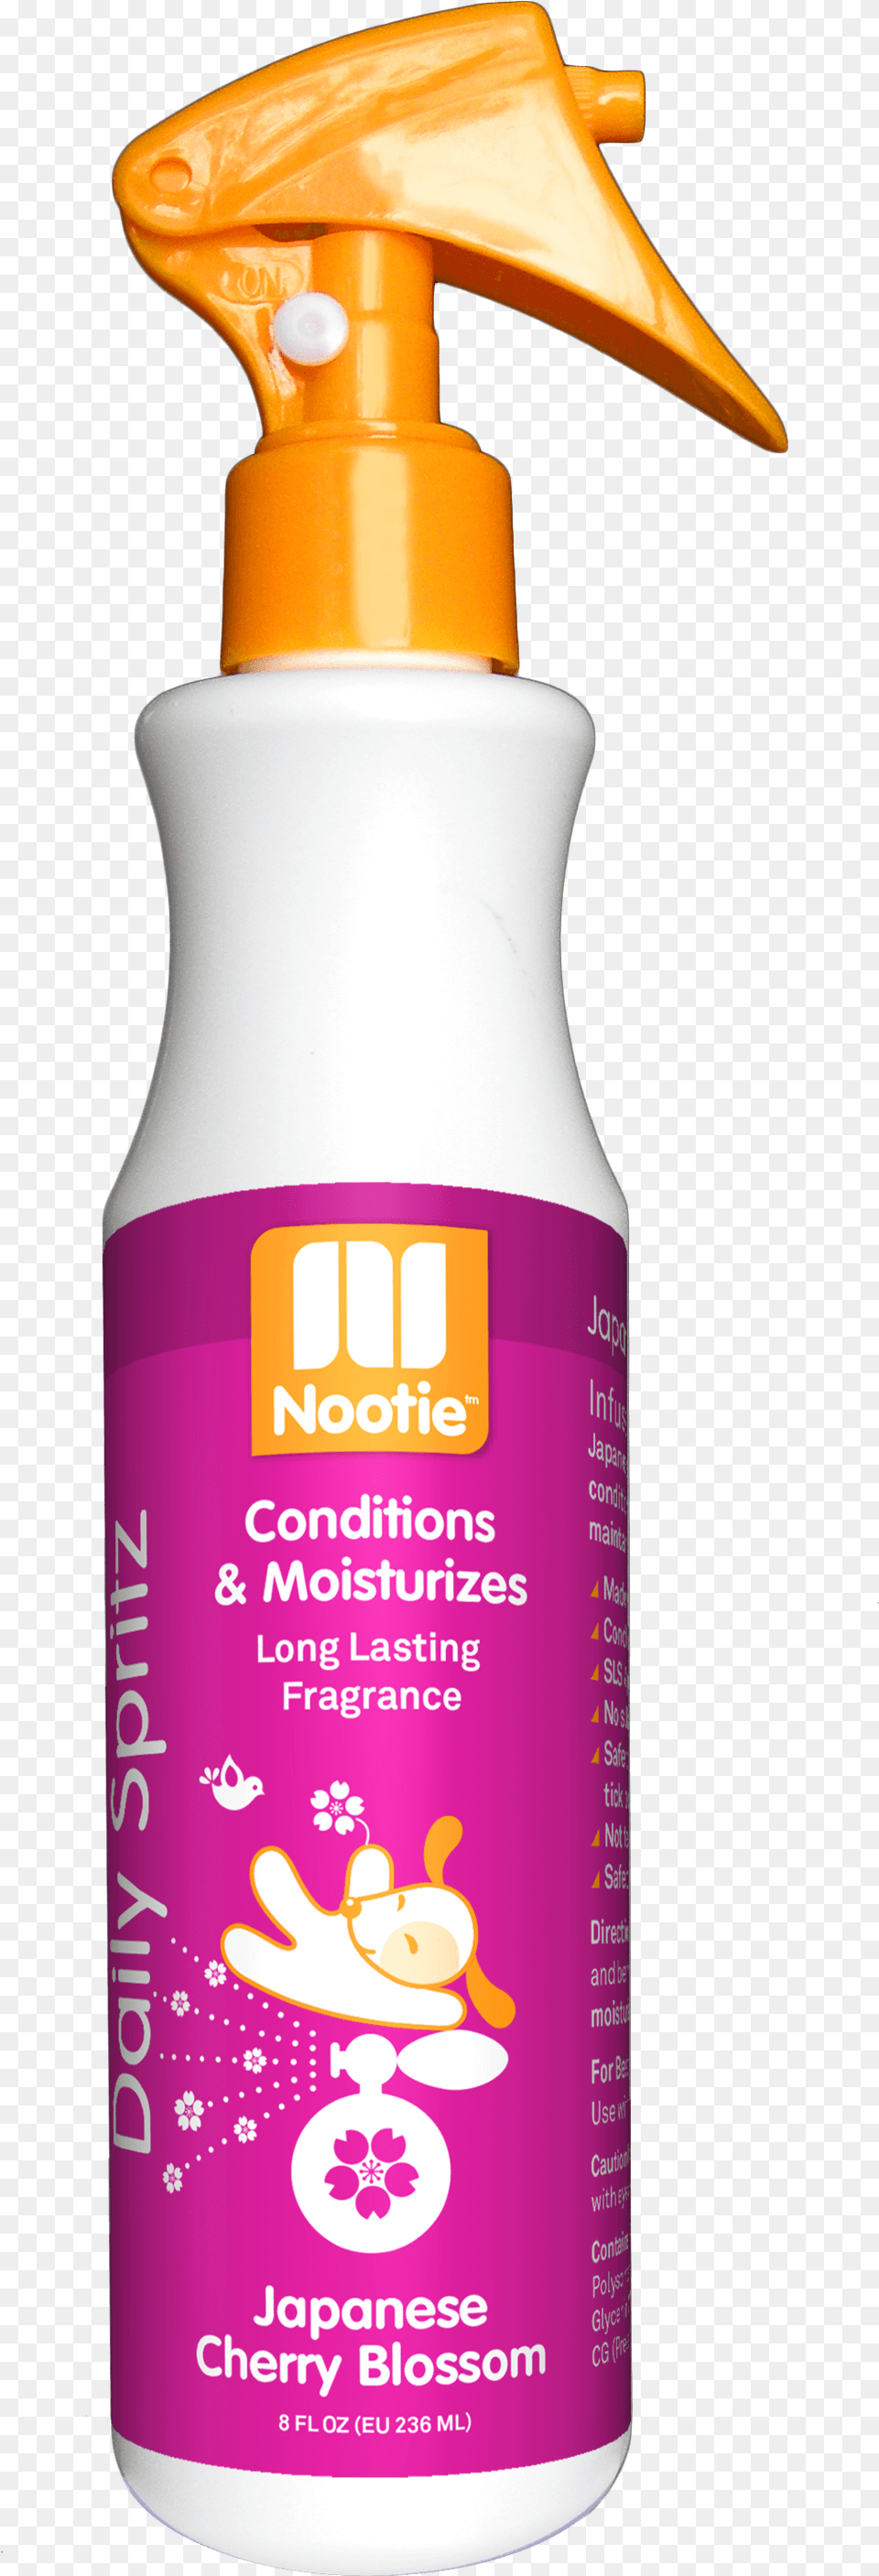 Nootie Daily Spritz, Bottle, Lotion, Cosmetics, Sunscreen Png